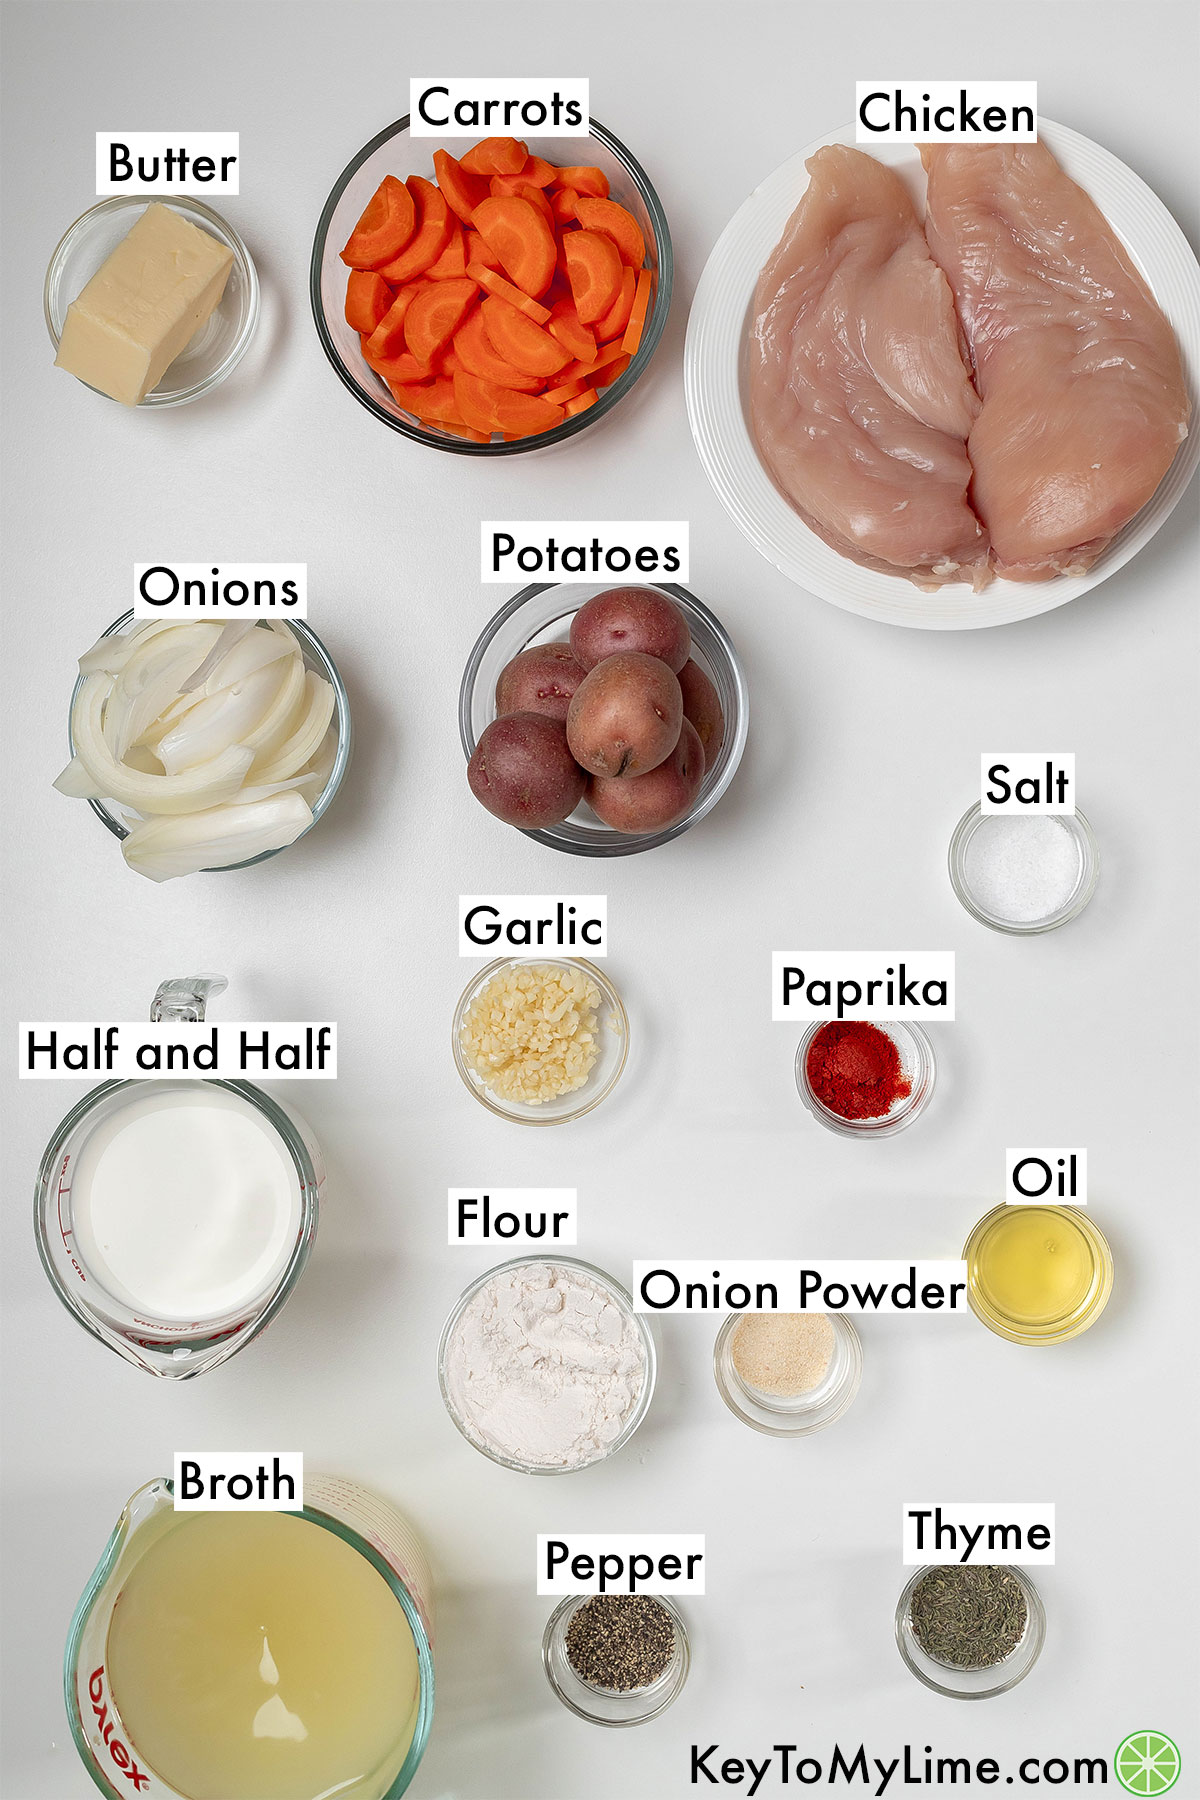 The labeled ingredients for Dutch oven chicken breast.